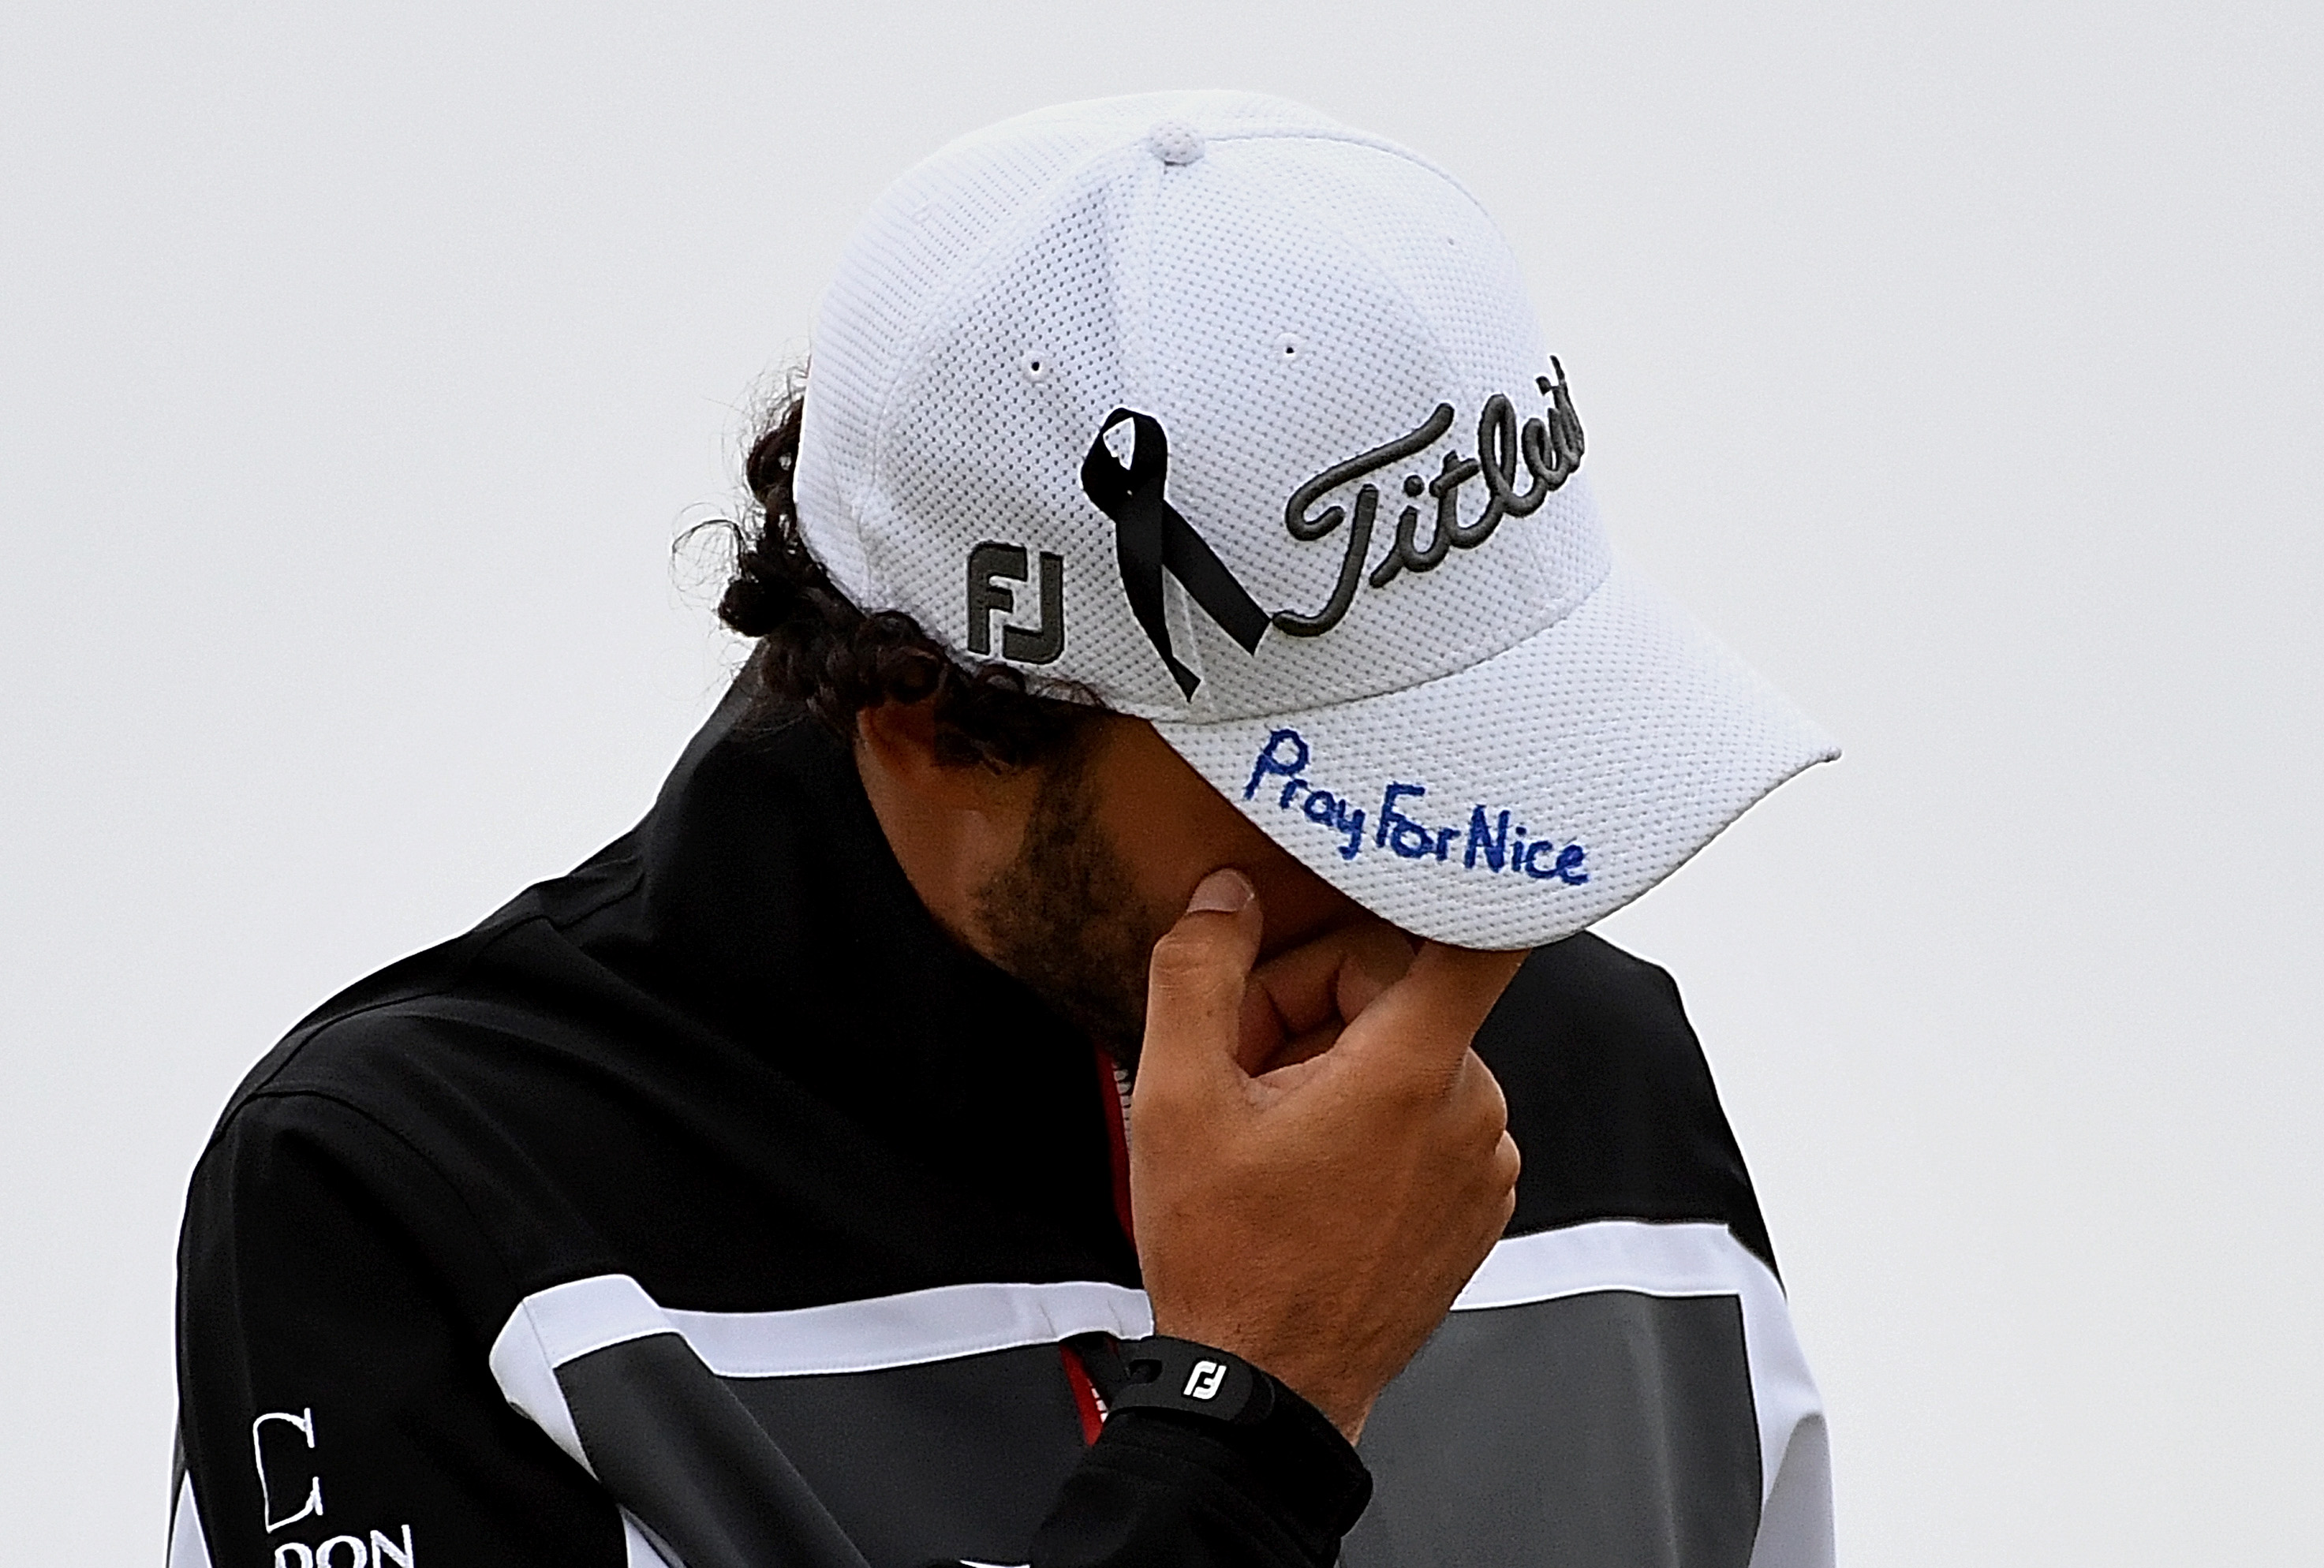 Prayers for Nice as 2nd round begins at the British Open